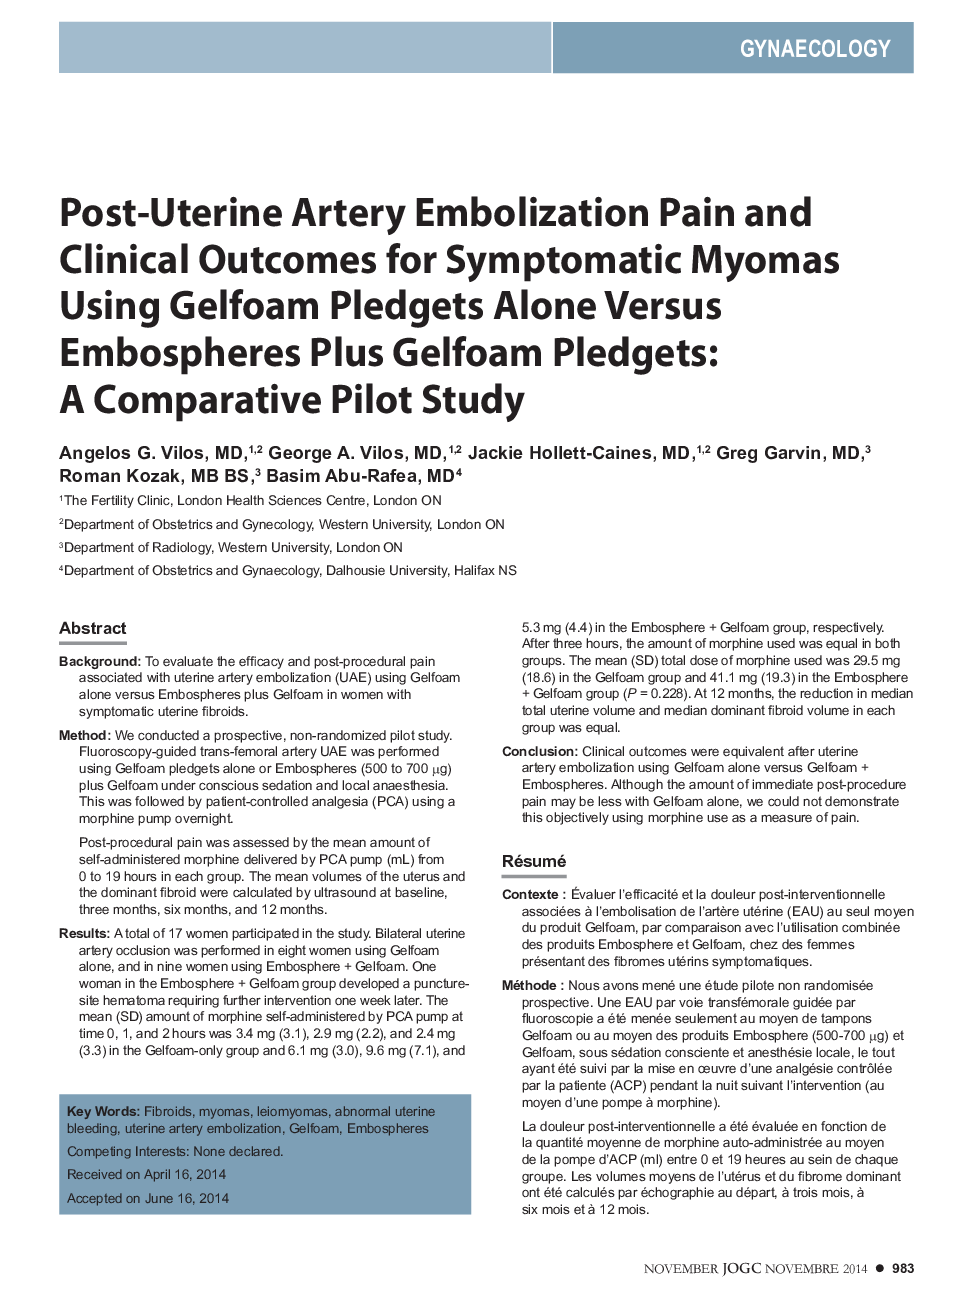 Post-Uterine Artery Embolization Pain and Clinical Outcomes for Symptomatic Myomas Using Gelfoam Pledgets Alone Versus Embospheres Plus Gelfoam Pledgets: A Comparative Pilot Study